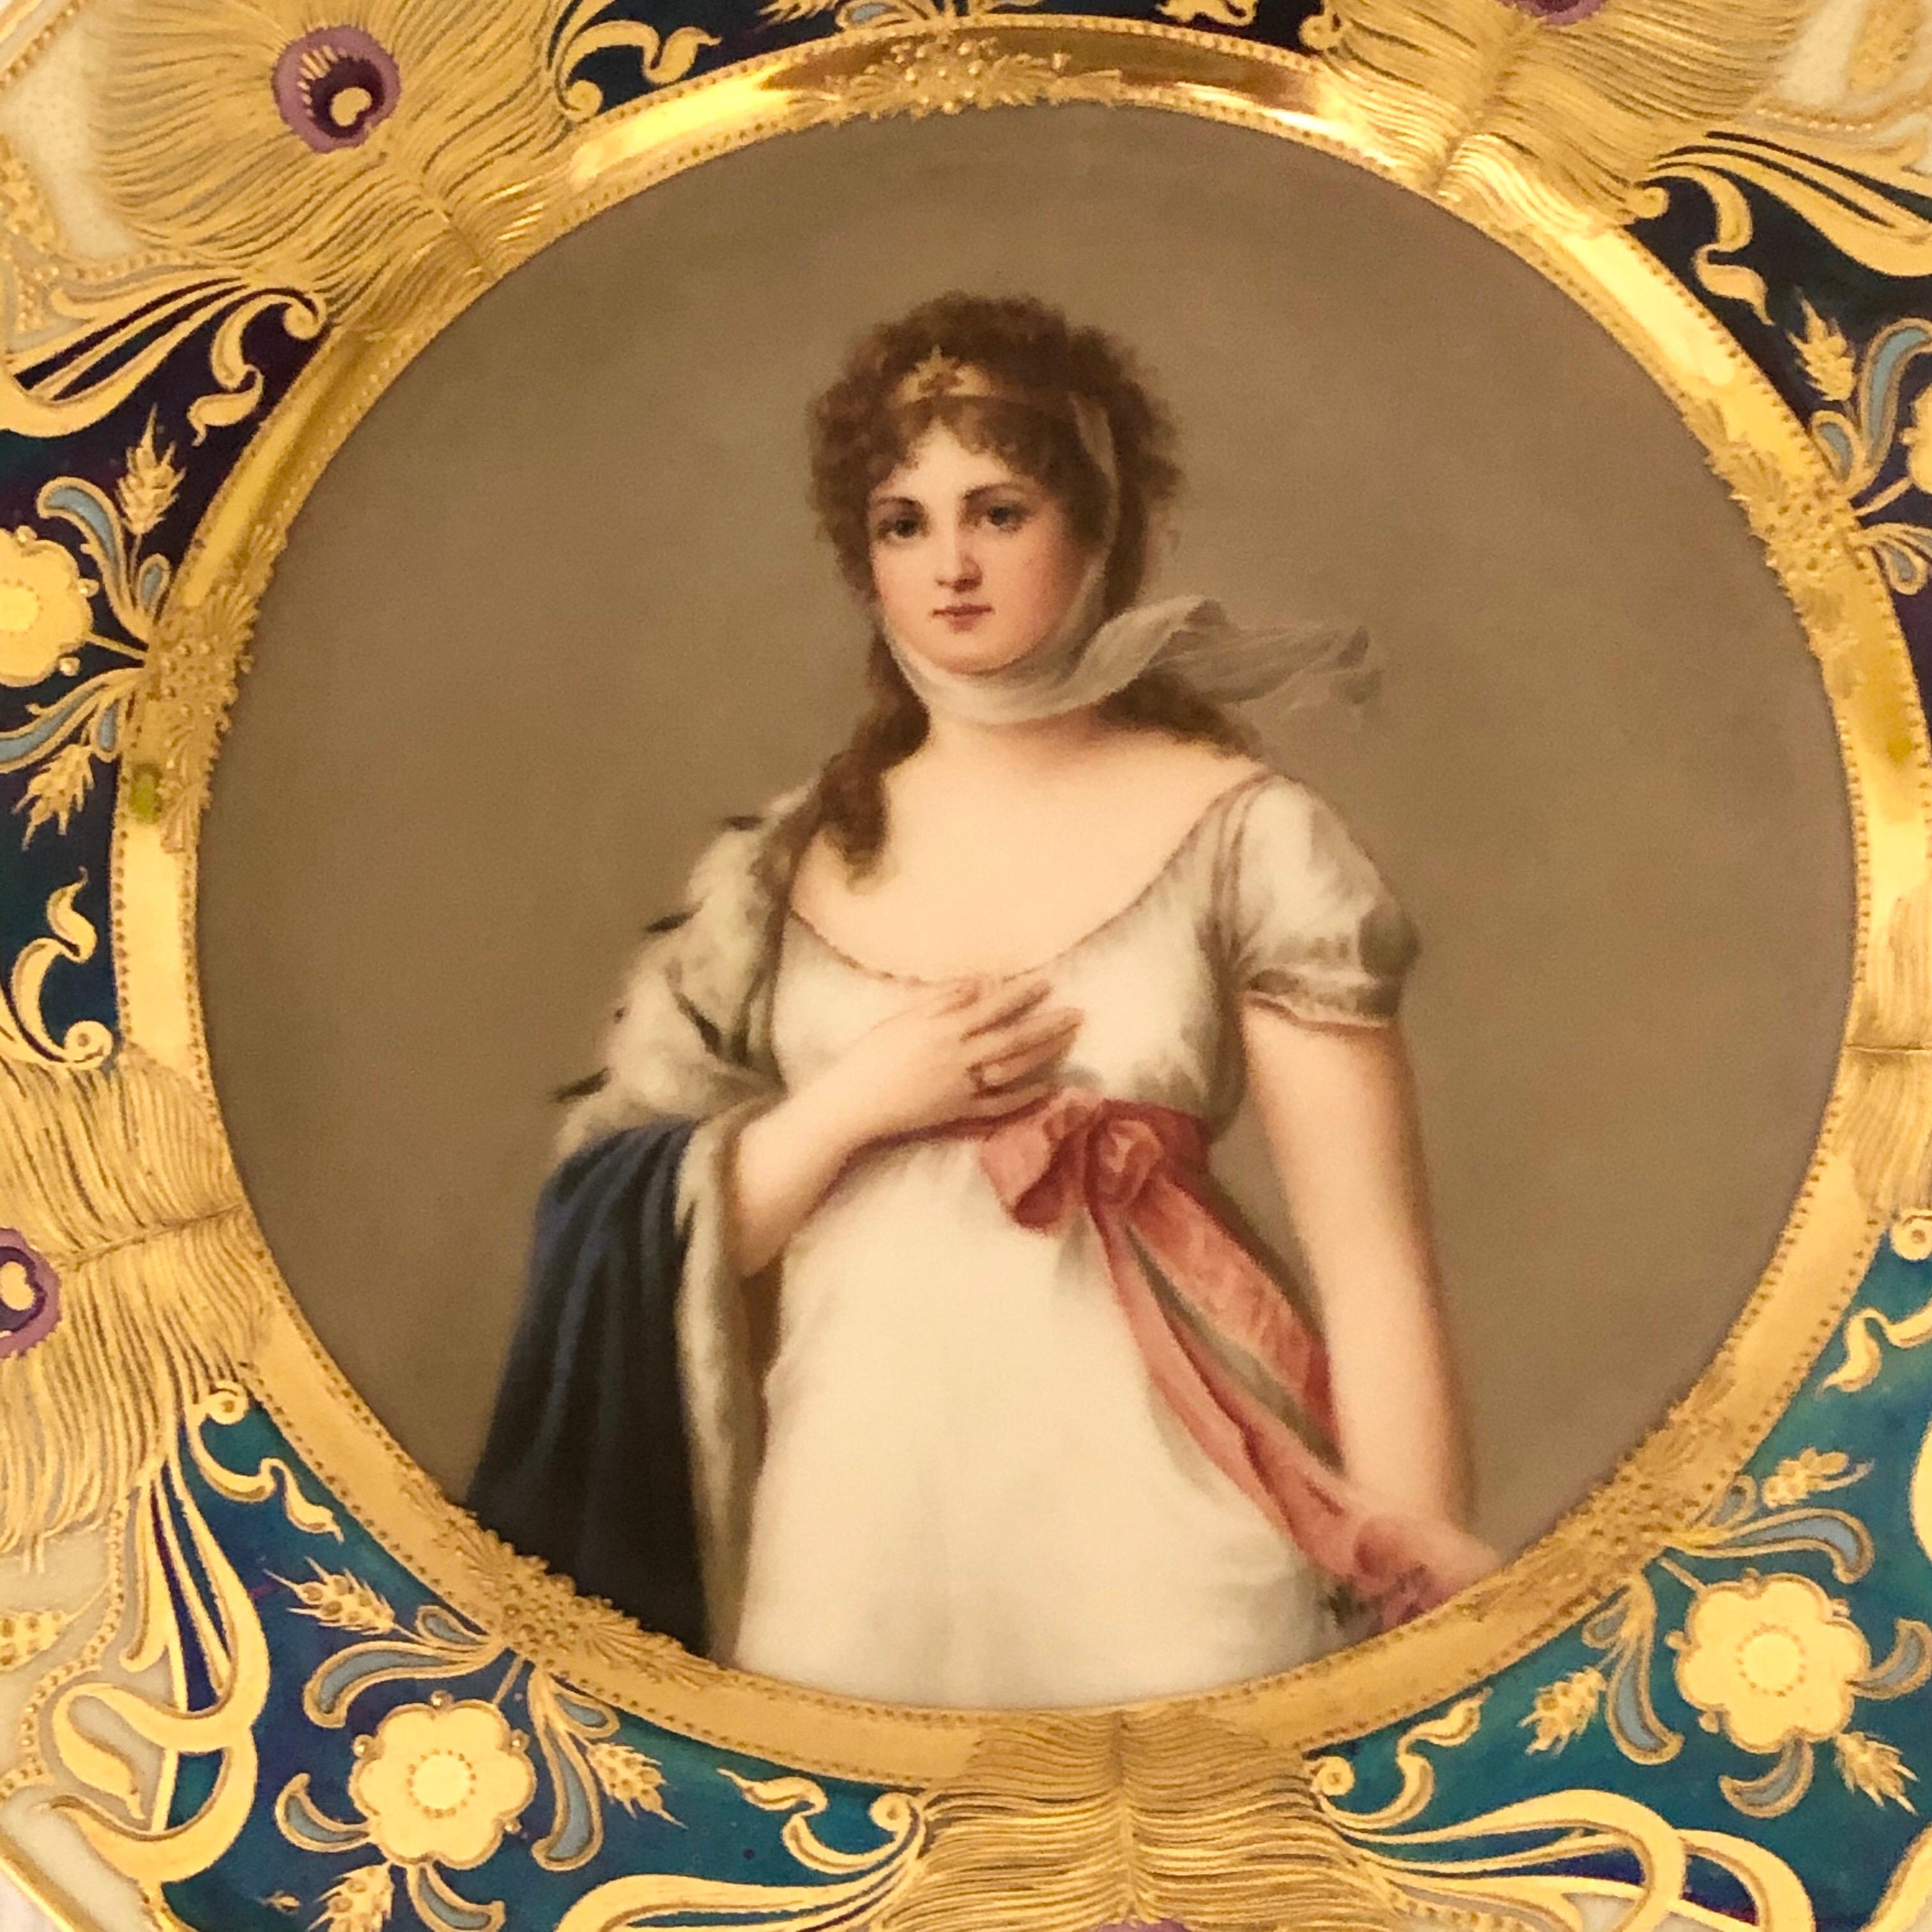 Royal Vienna portrait cabinet plate of Marie Louise artist-signed Wagner. Marie Louise was Napoleon’s second wife. She was very beautiful and many artists painted her. He loved Josephine, his first wife, but she did not have any children with